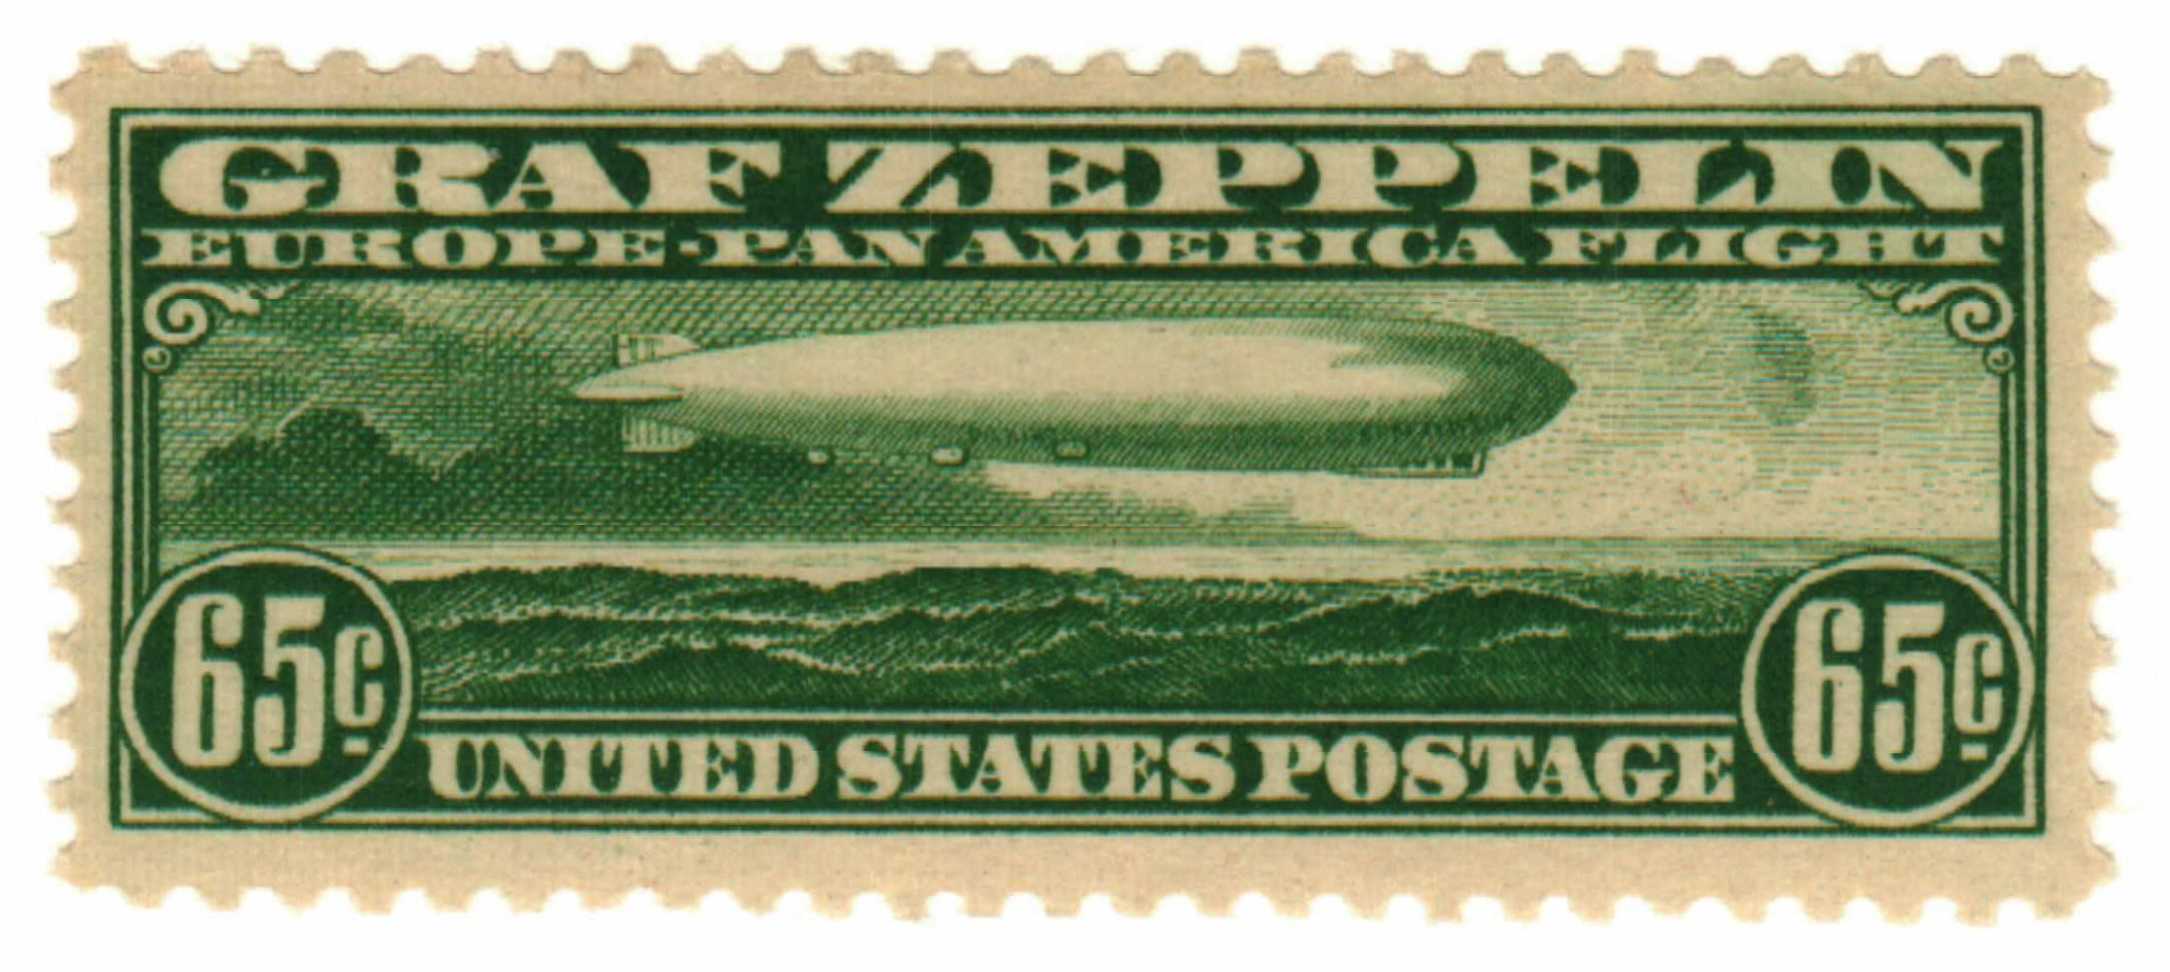 The Controversial Zeppelin Stamps That Enraged 1930s Collectors